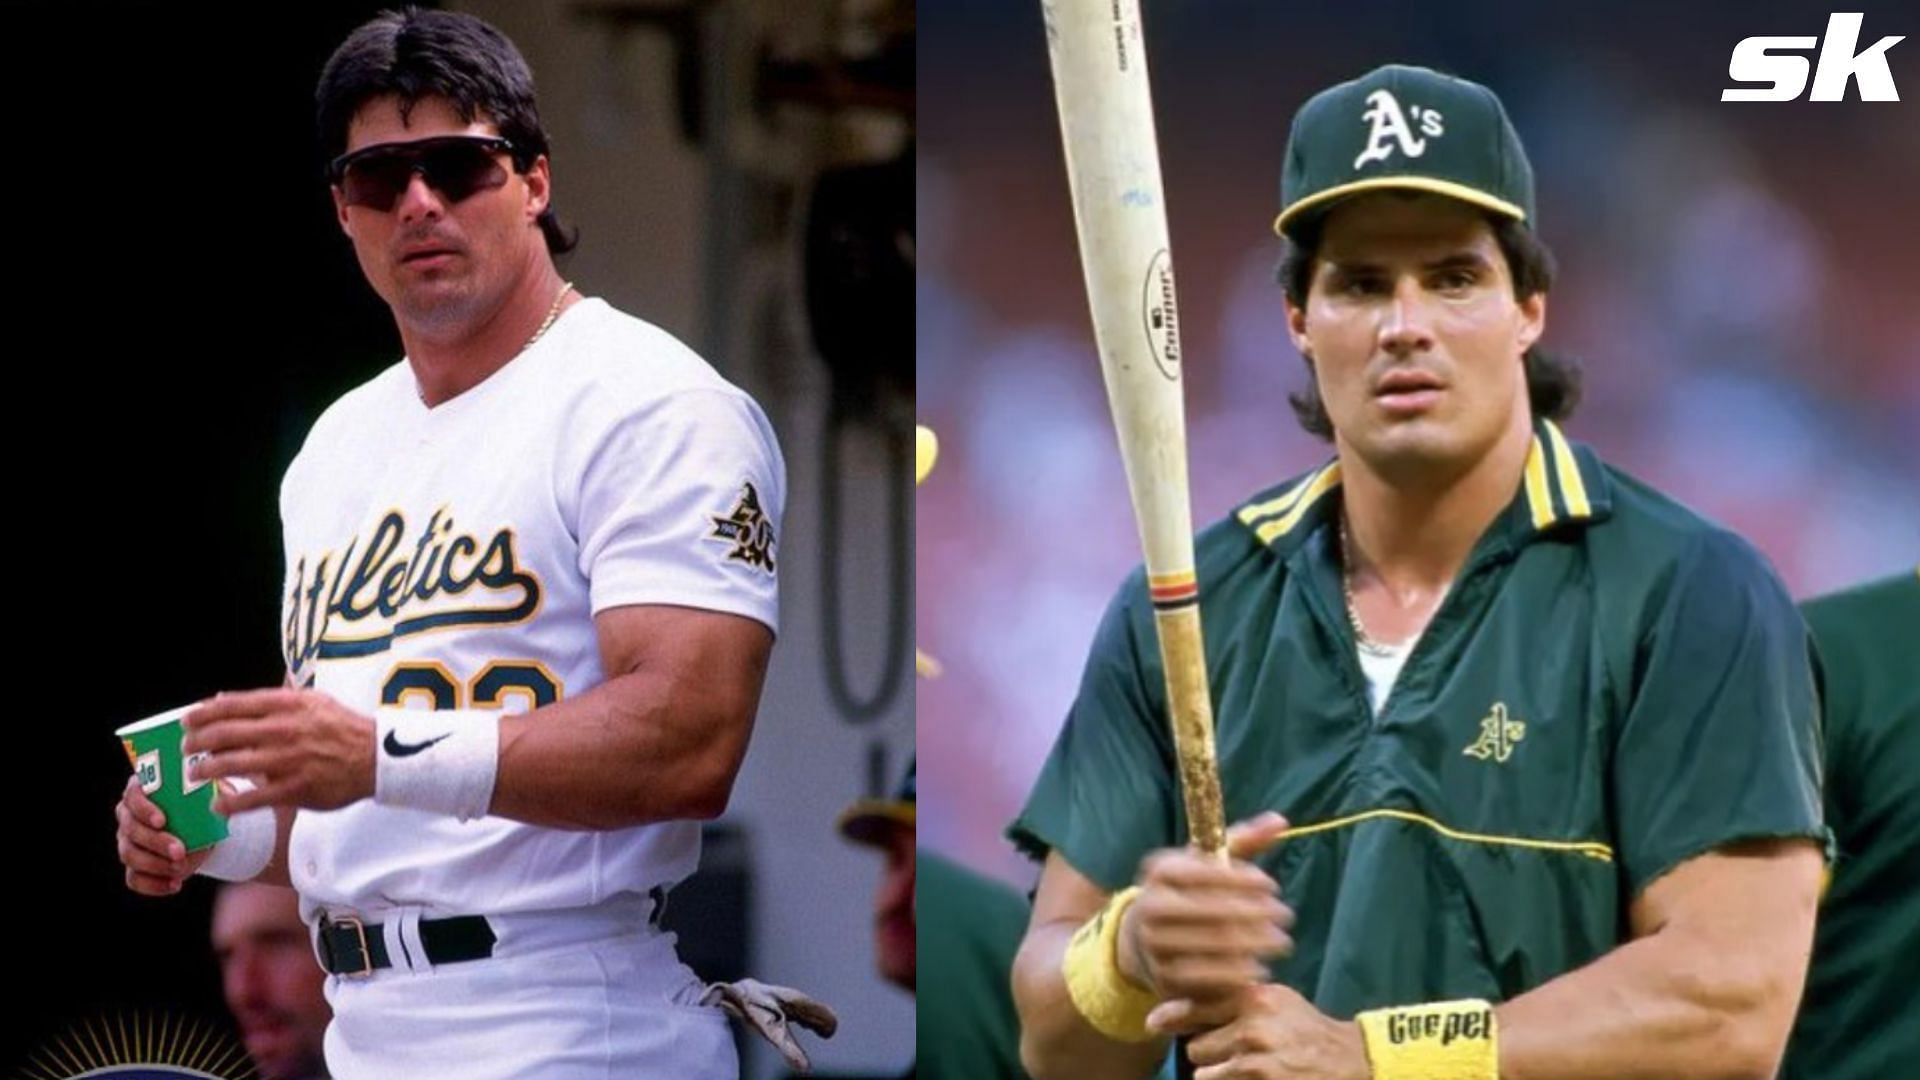 Why Jose Canseco Started Using Performance-Enhancing Drugs